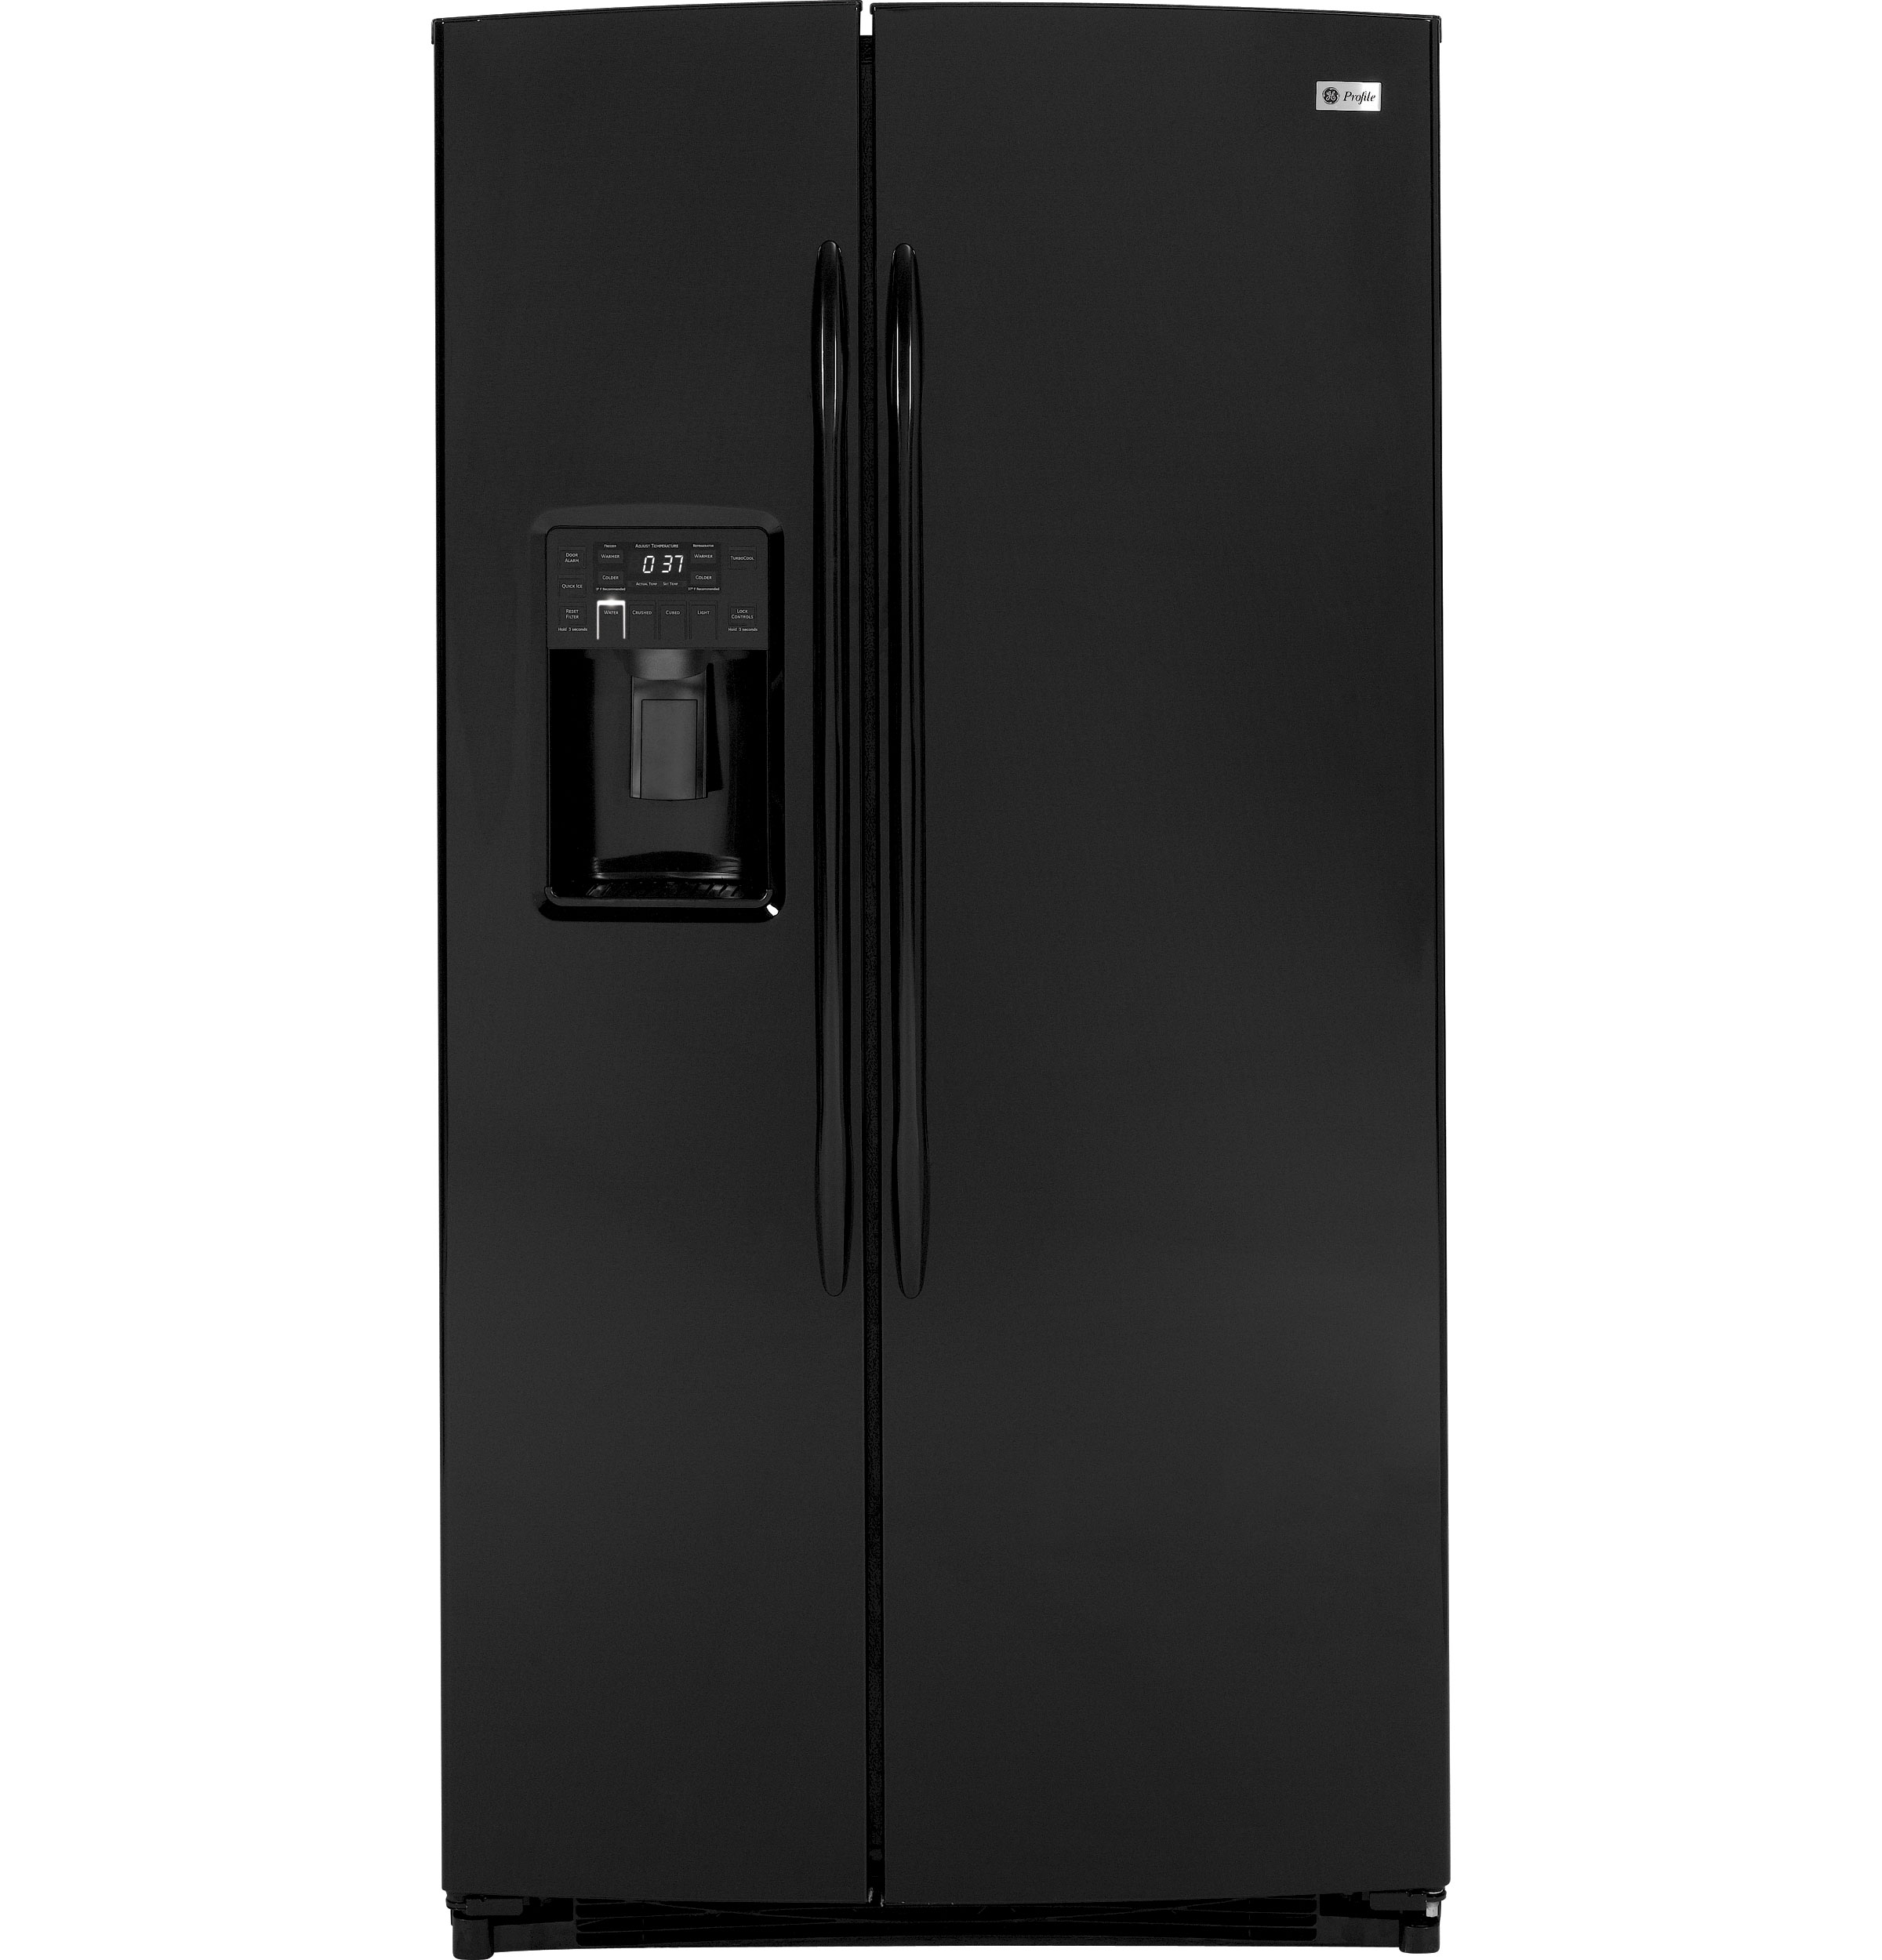 GE Profile™ ENERGY STAR® 25.9 Cu. Ft. Side-by-Side Refrigerator with Dispenser